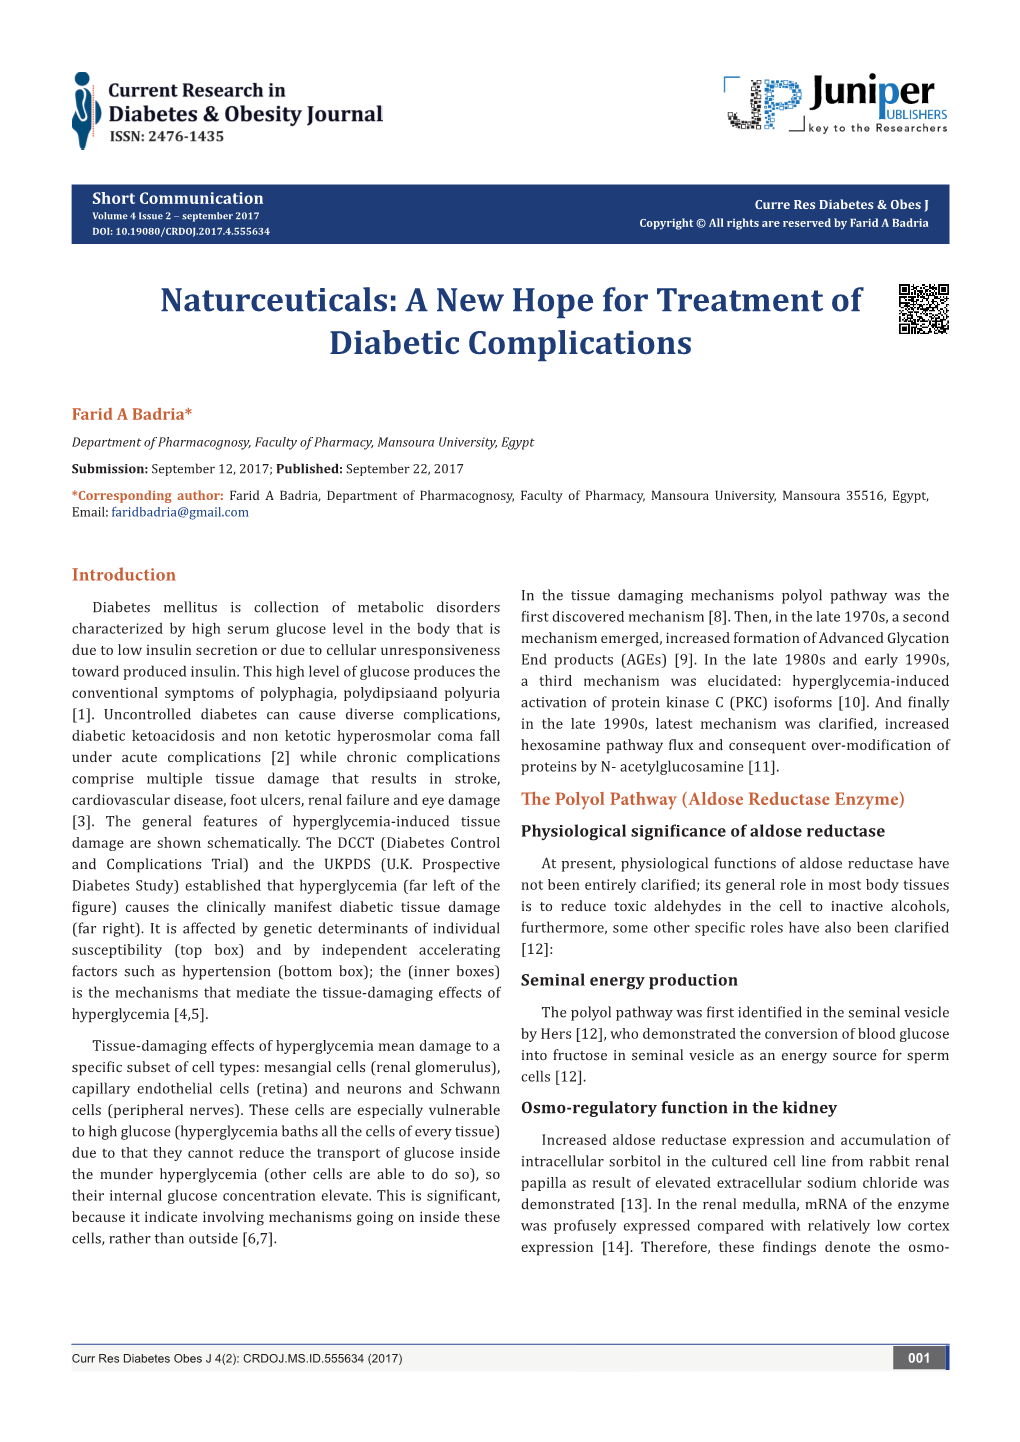 Naturceuticals: a New Hope for Treatment of Diabetic Complications